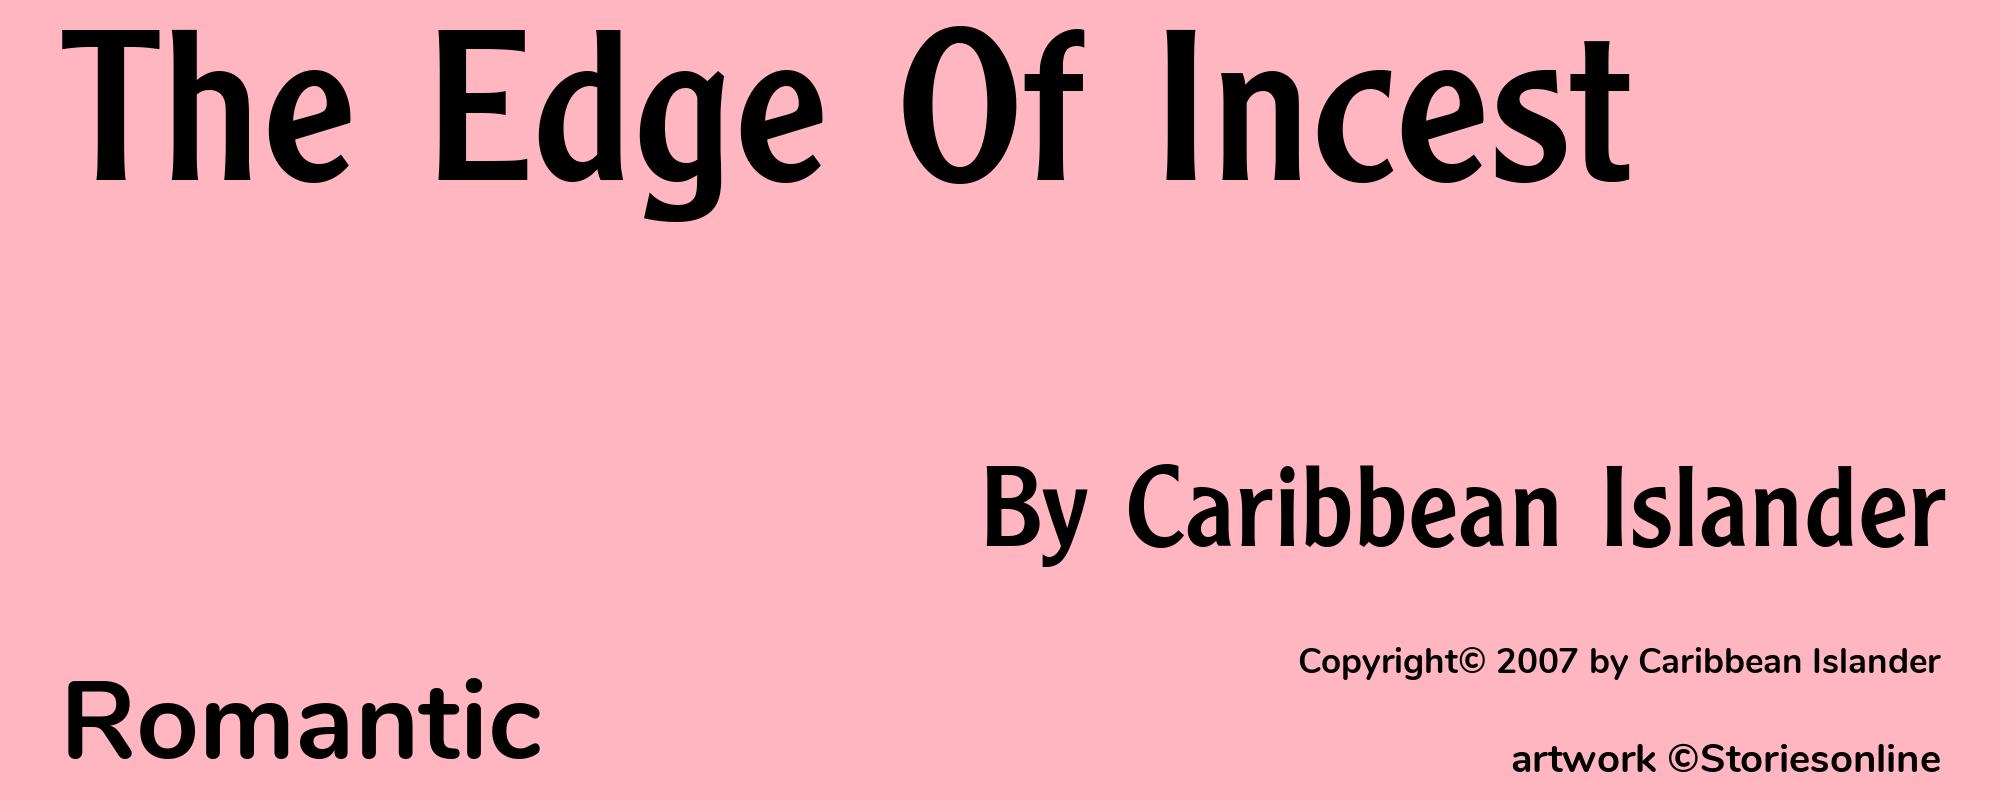 The Edge Of Incest - Cover